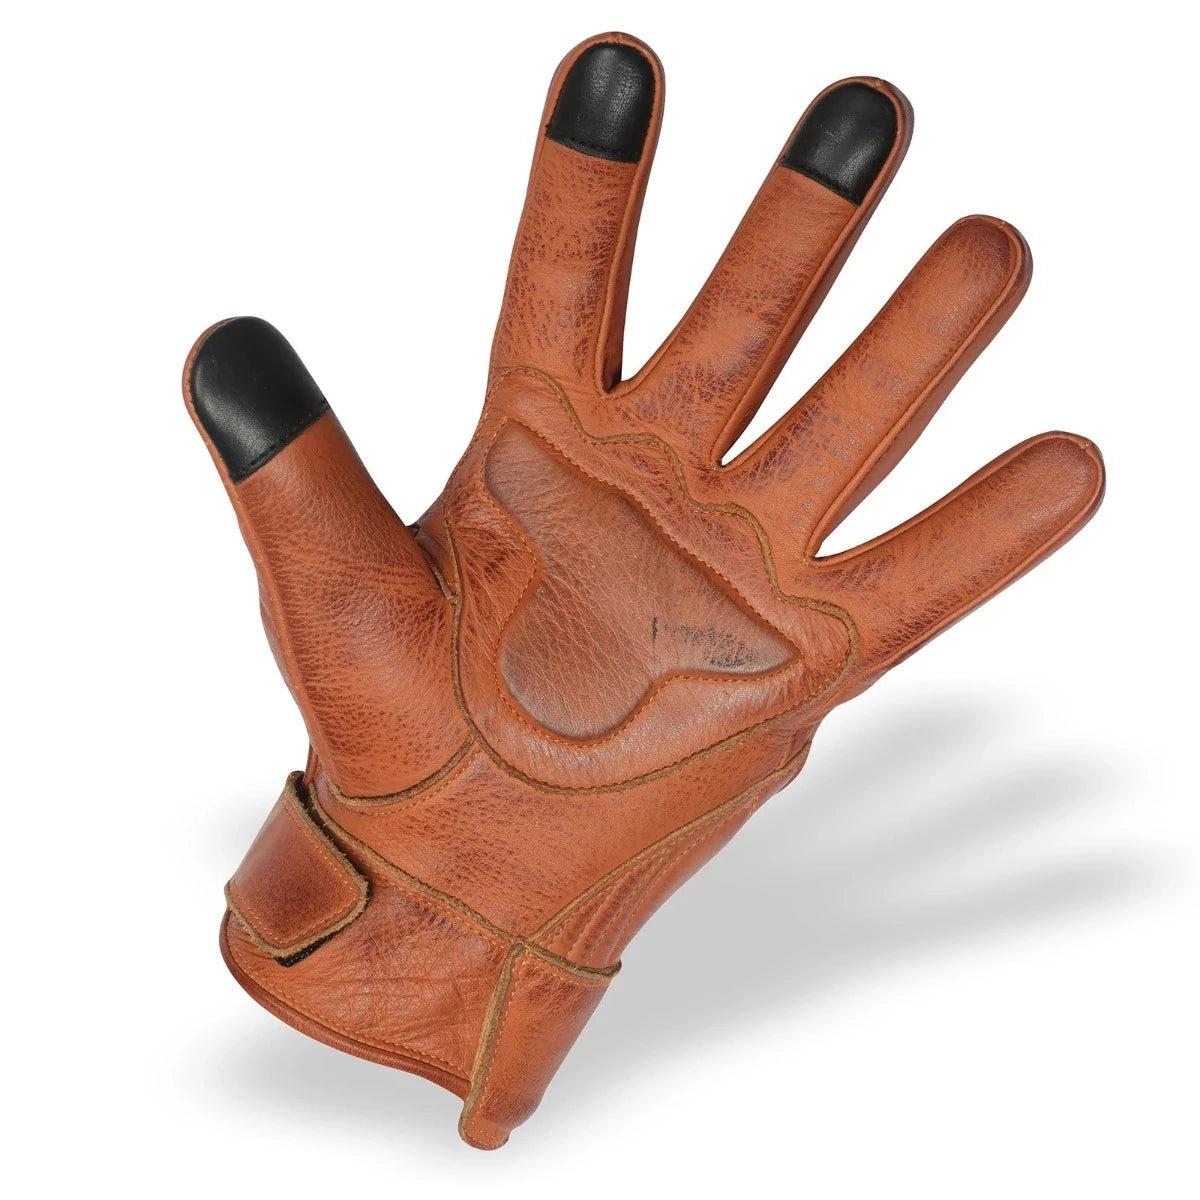 Vance Men's Premium Brown Leather Perforated Gloves